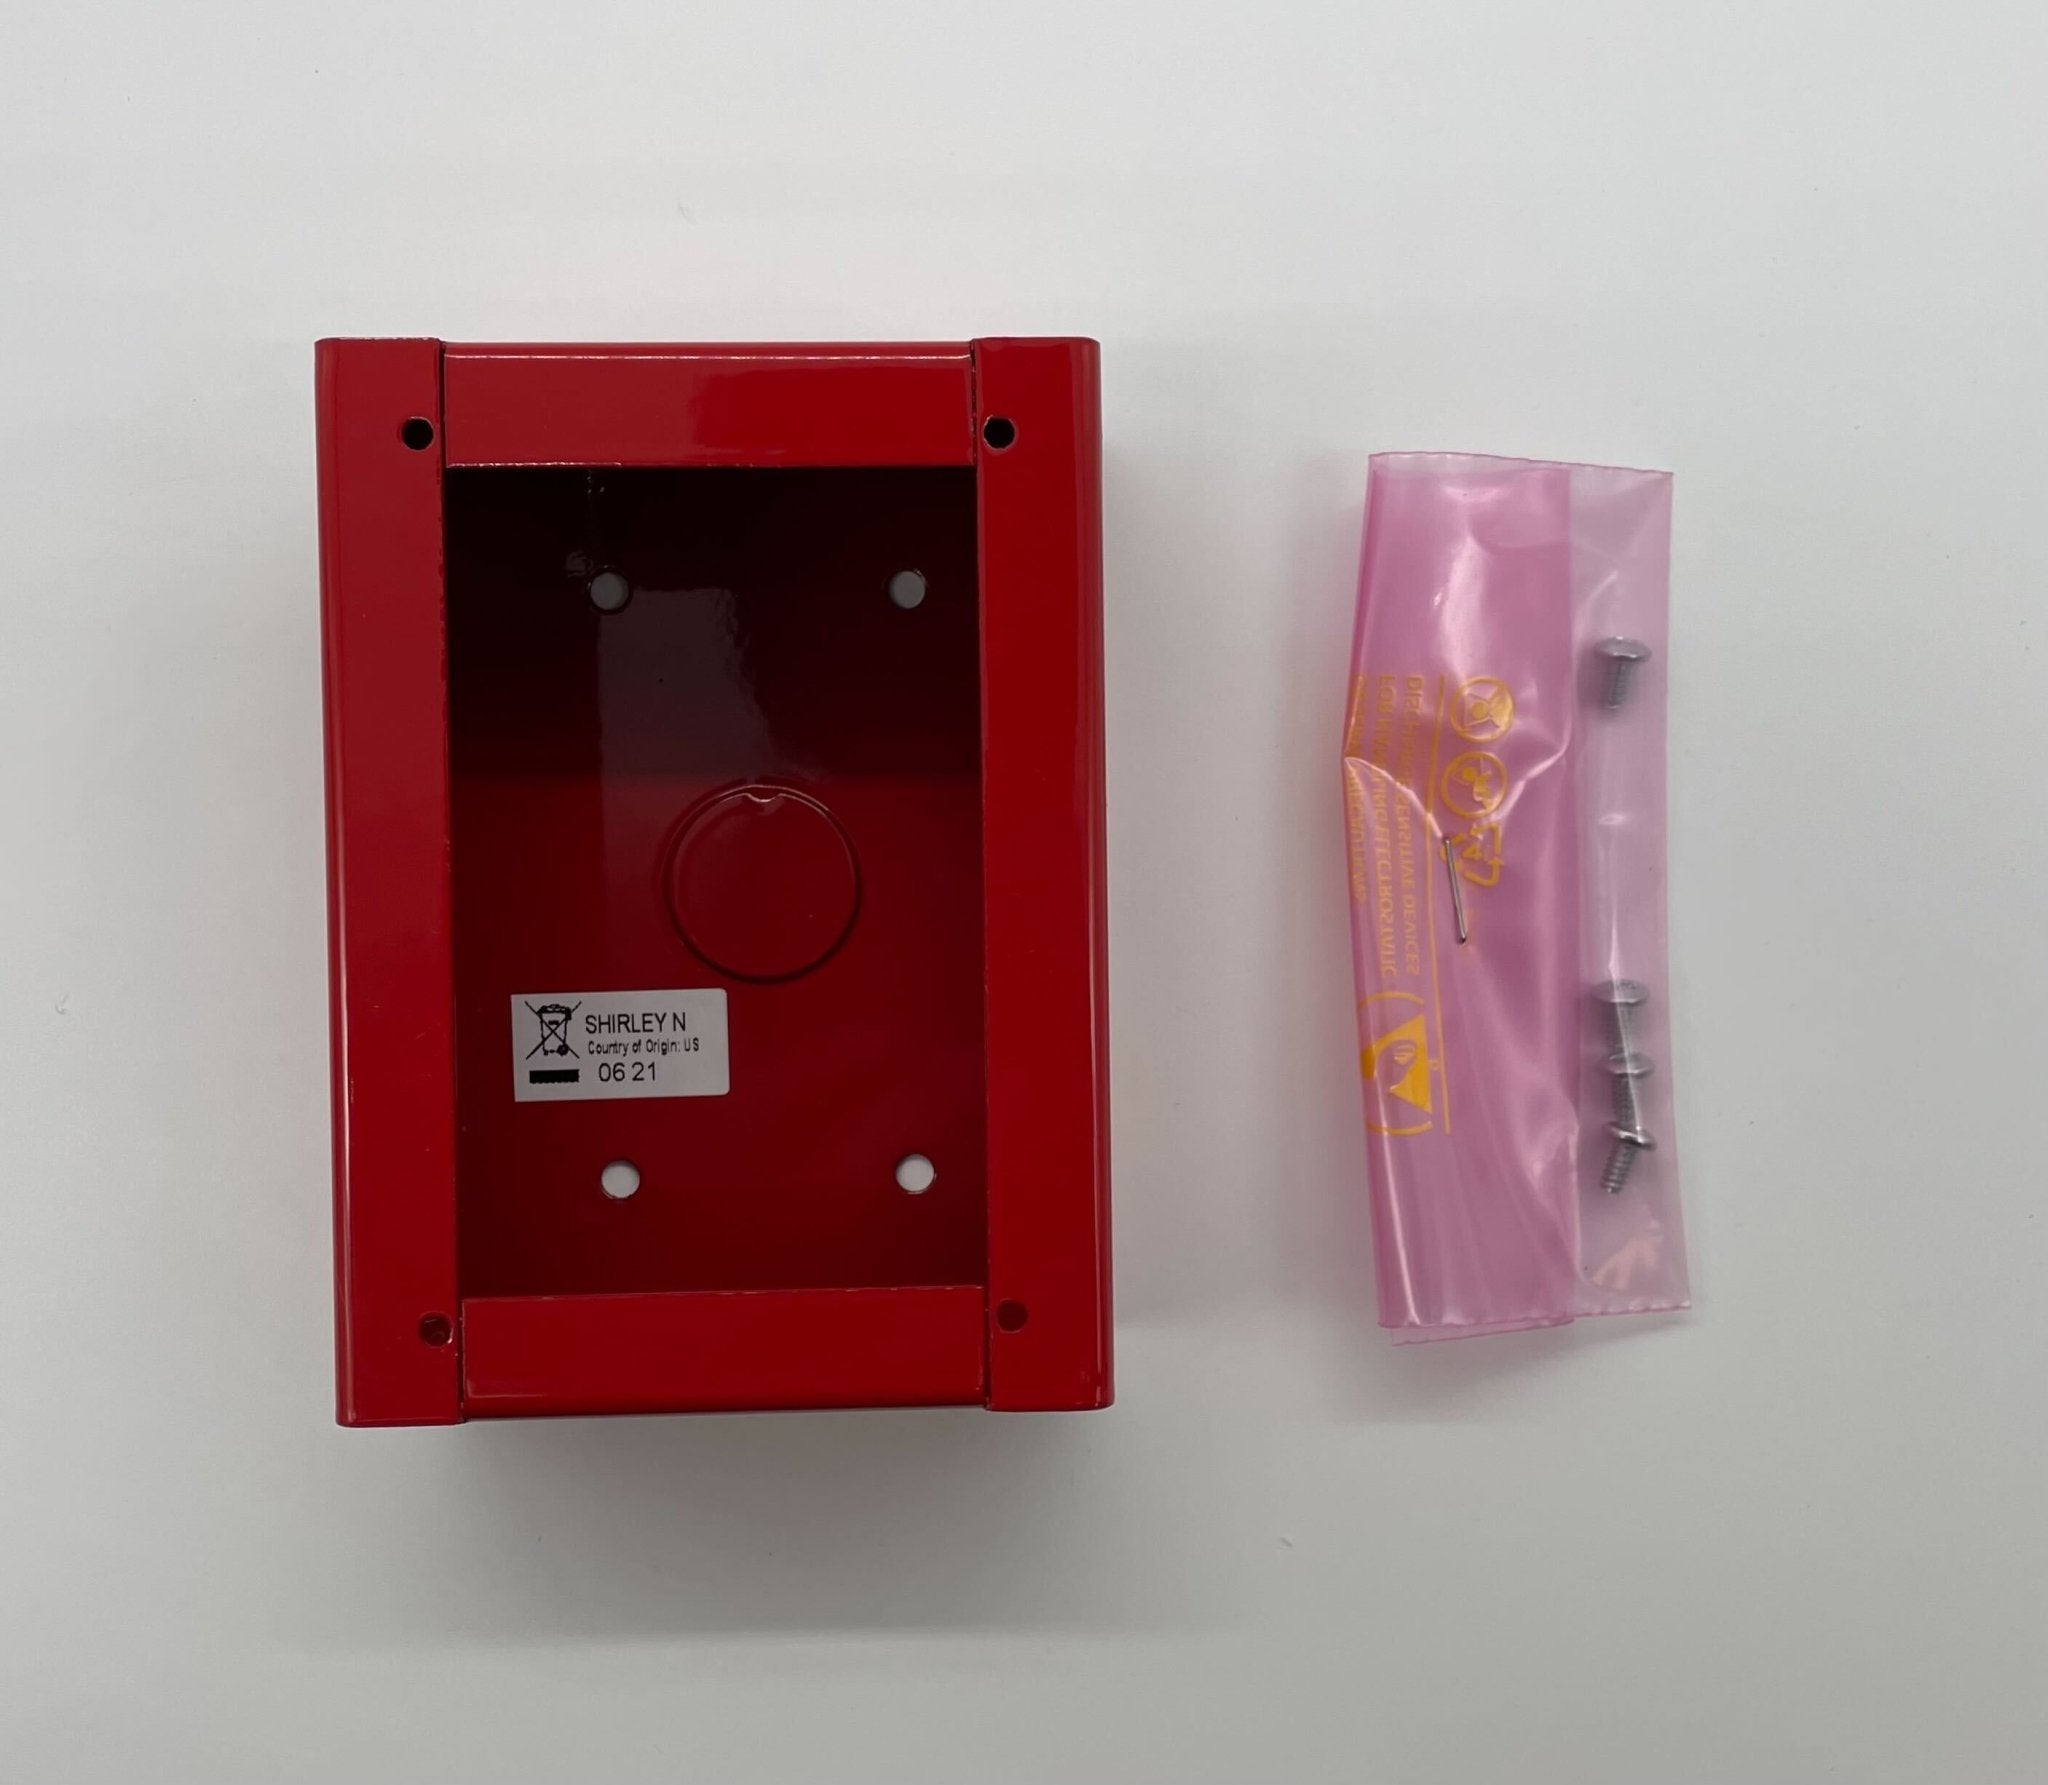 Silent Knight PS-SMBB Surface Mount Back Box - The Fire Alarm Supplier